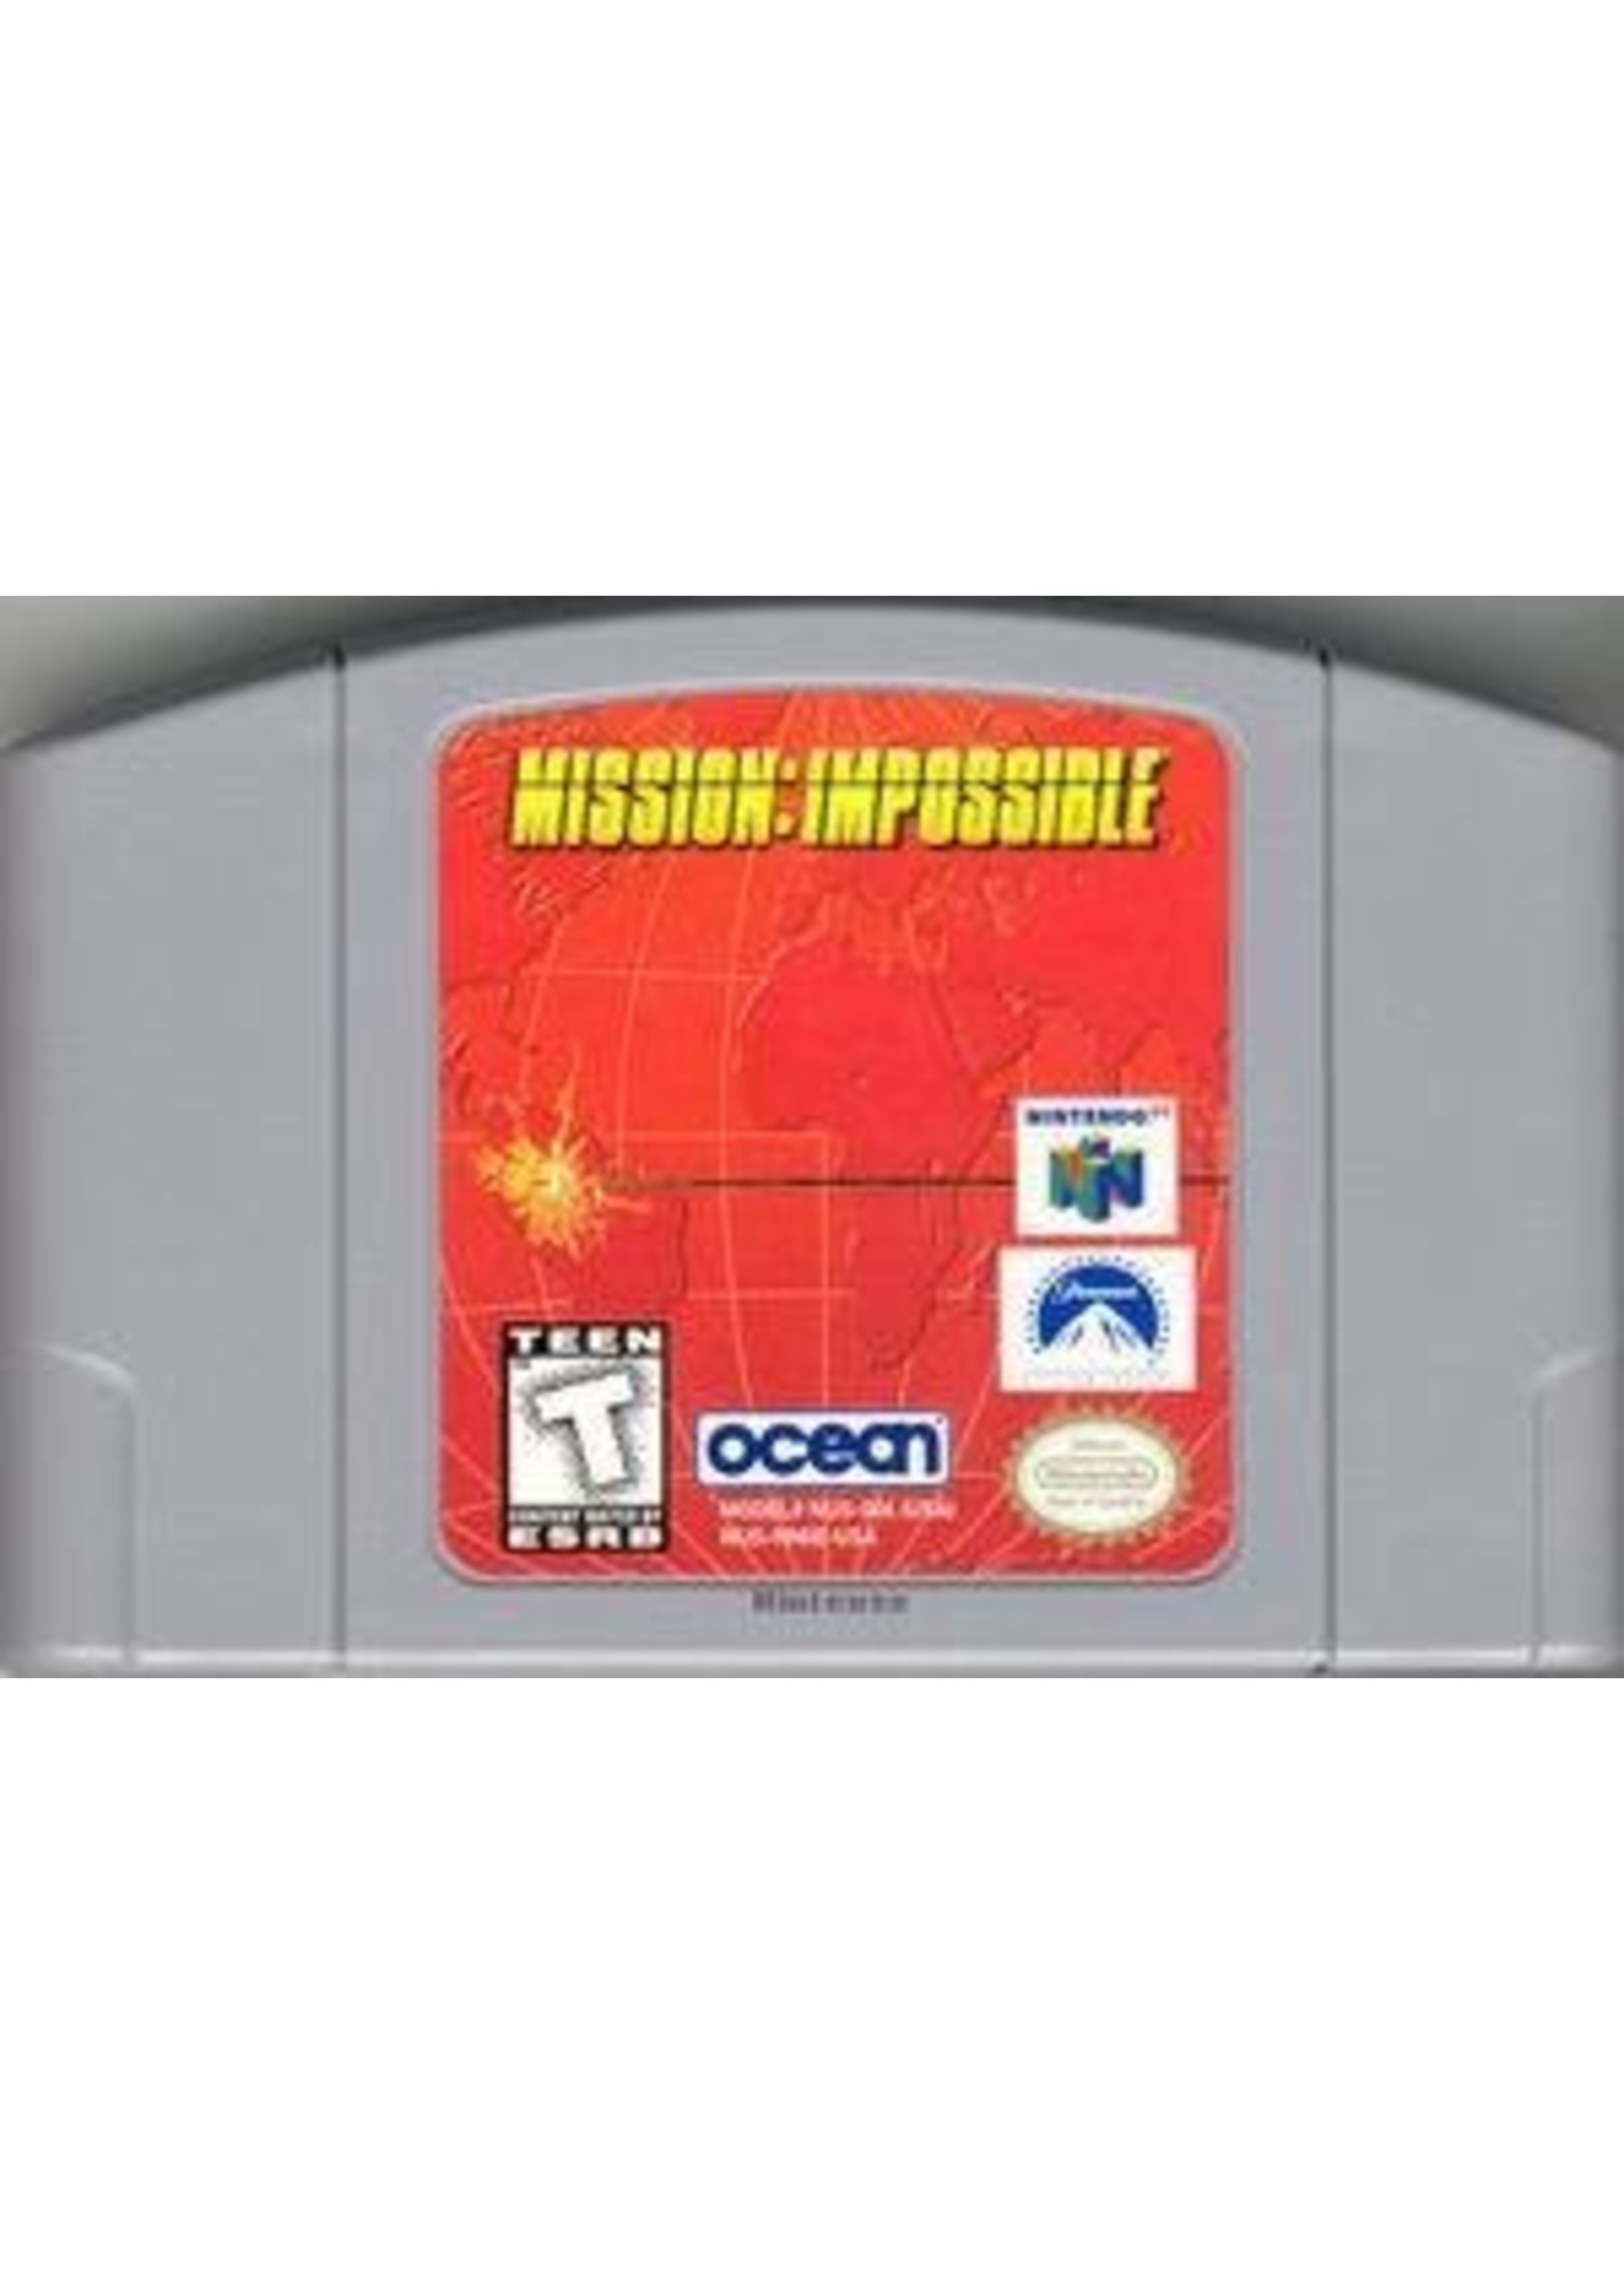 Nintendo 64 (N64) Mission Impossible